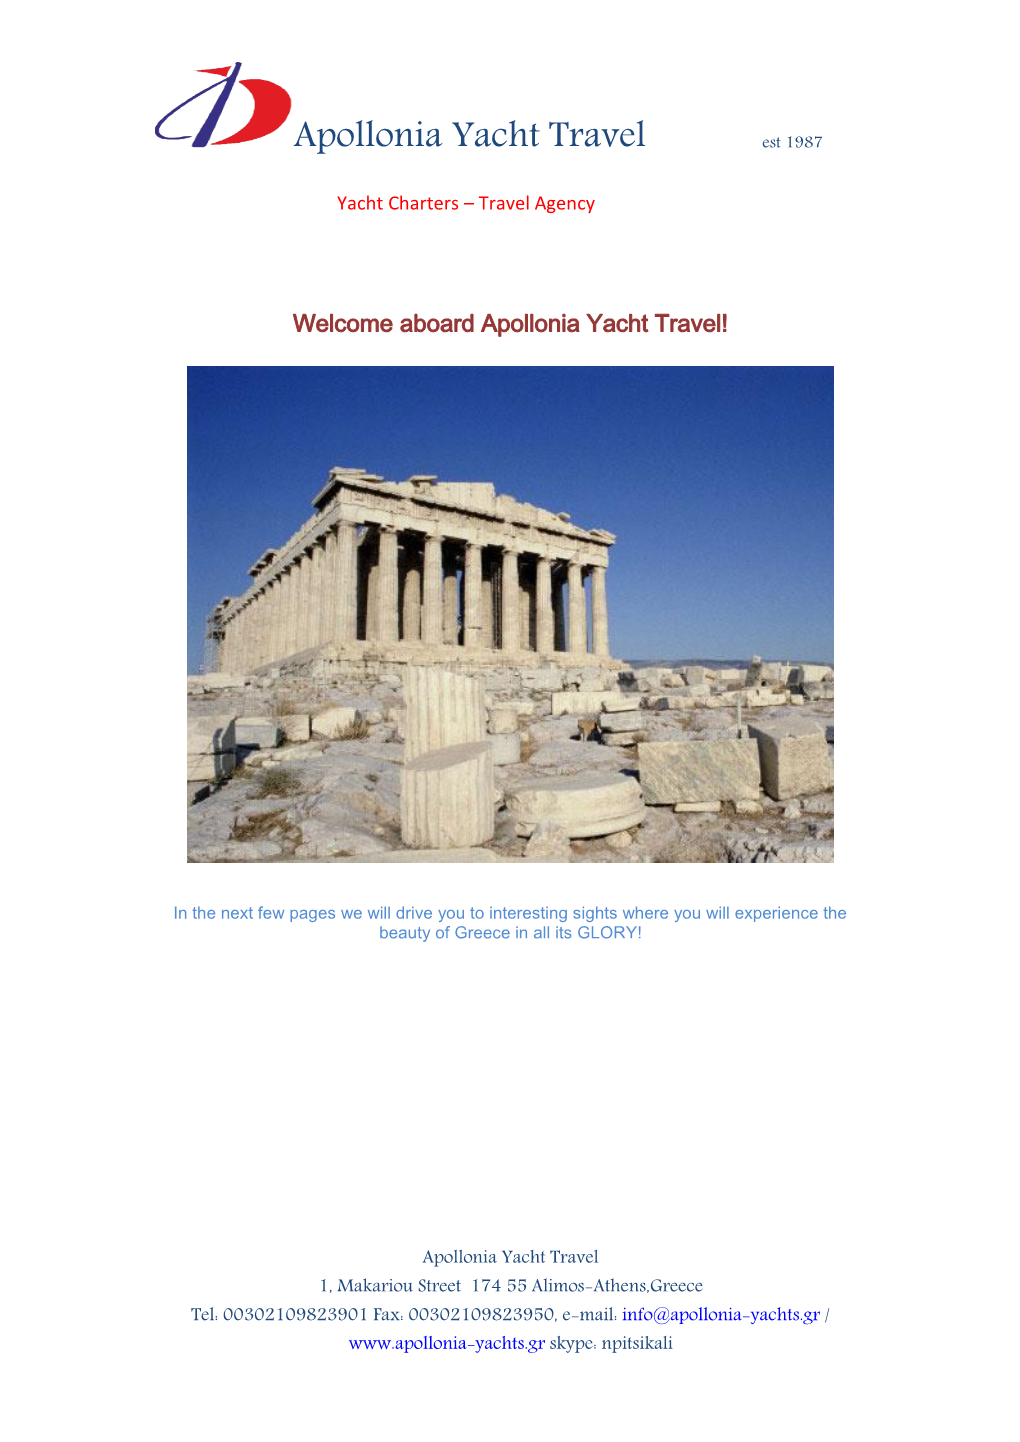 Sightseeing Tours in Greece